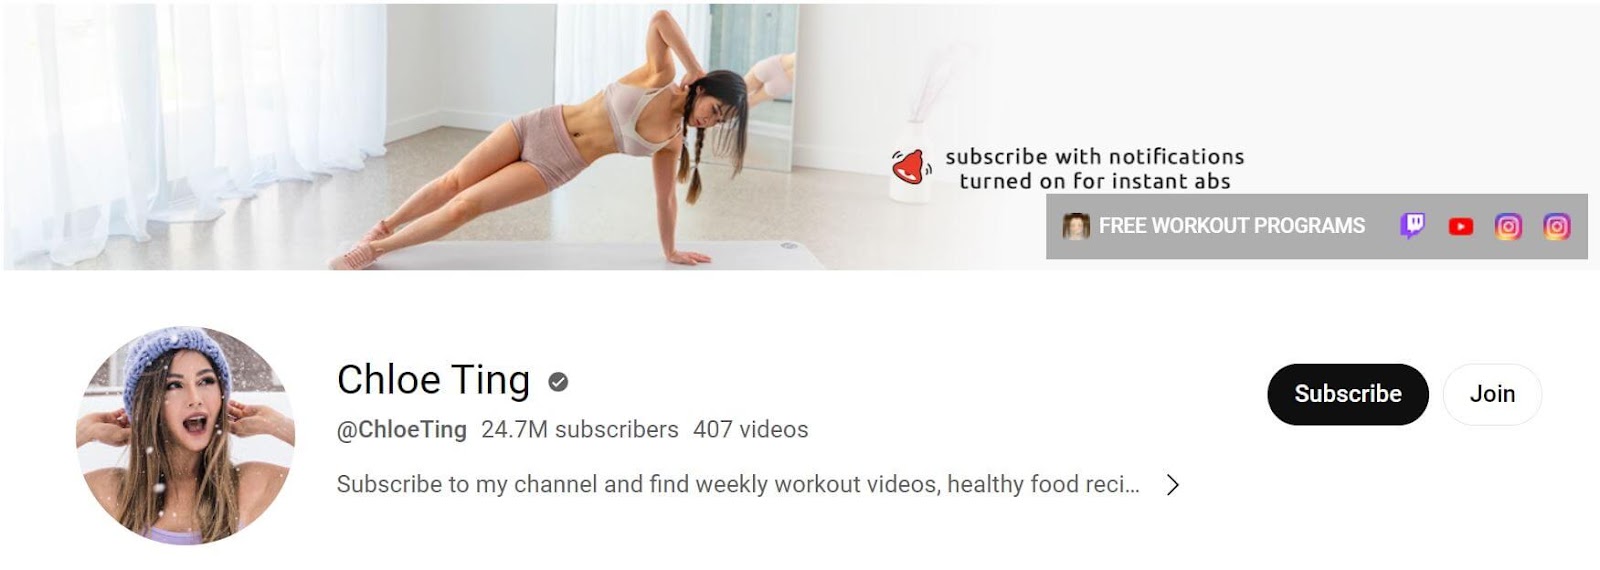 Chloe Ting: One of the YouTube Fitness Influencers